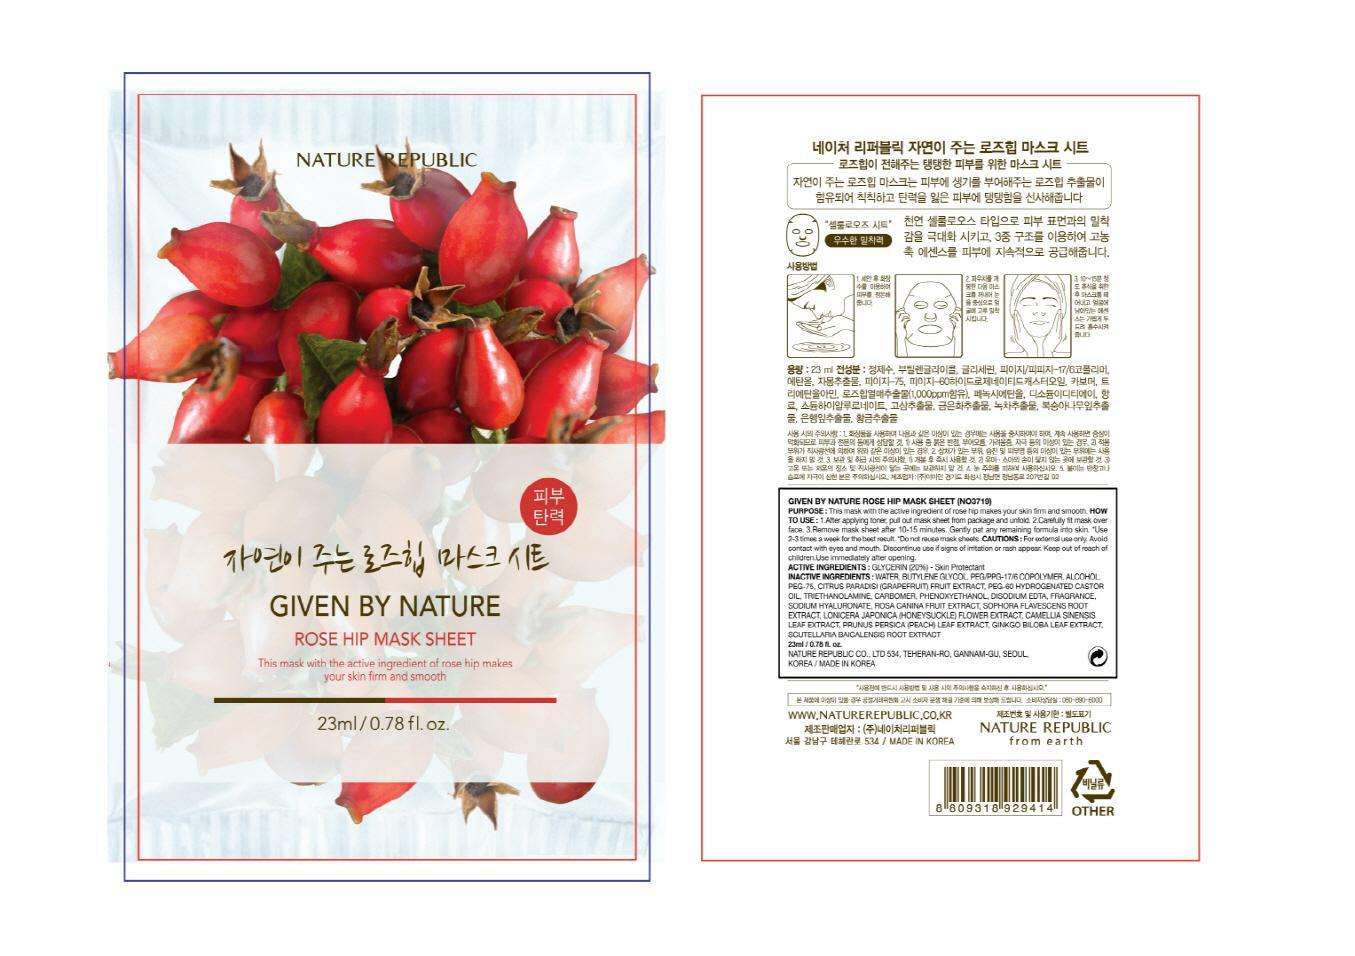 GIVEN BY NATURE ROSE HIP MASK SHEET